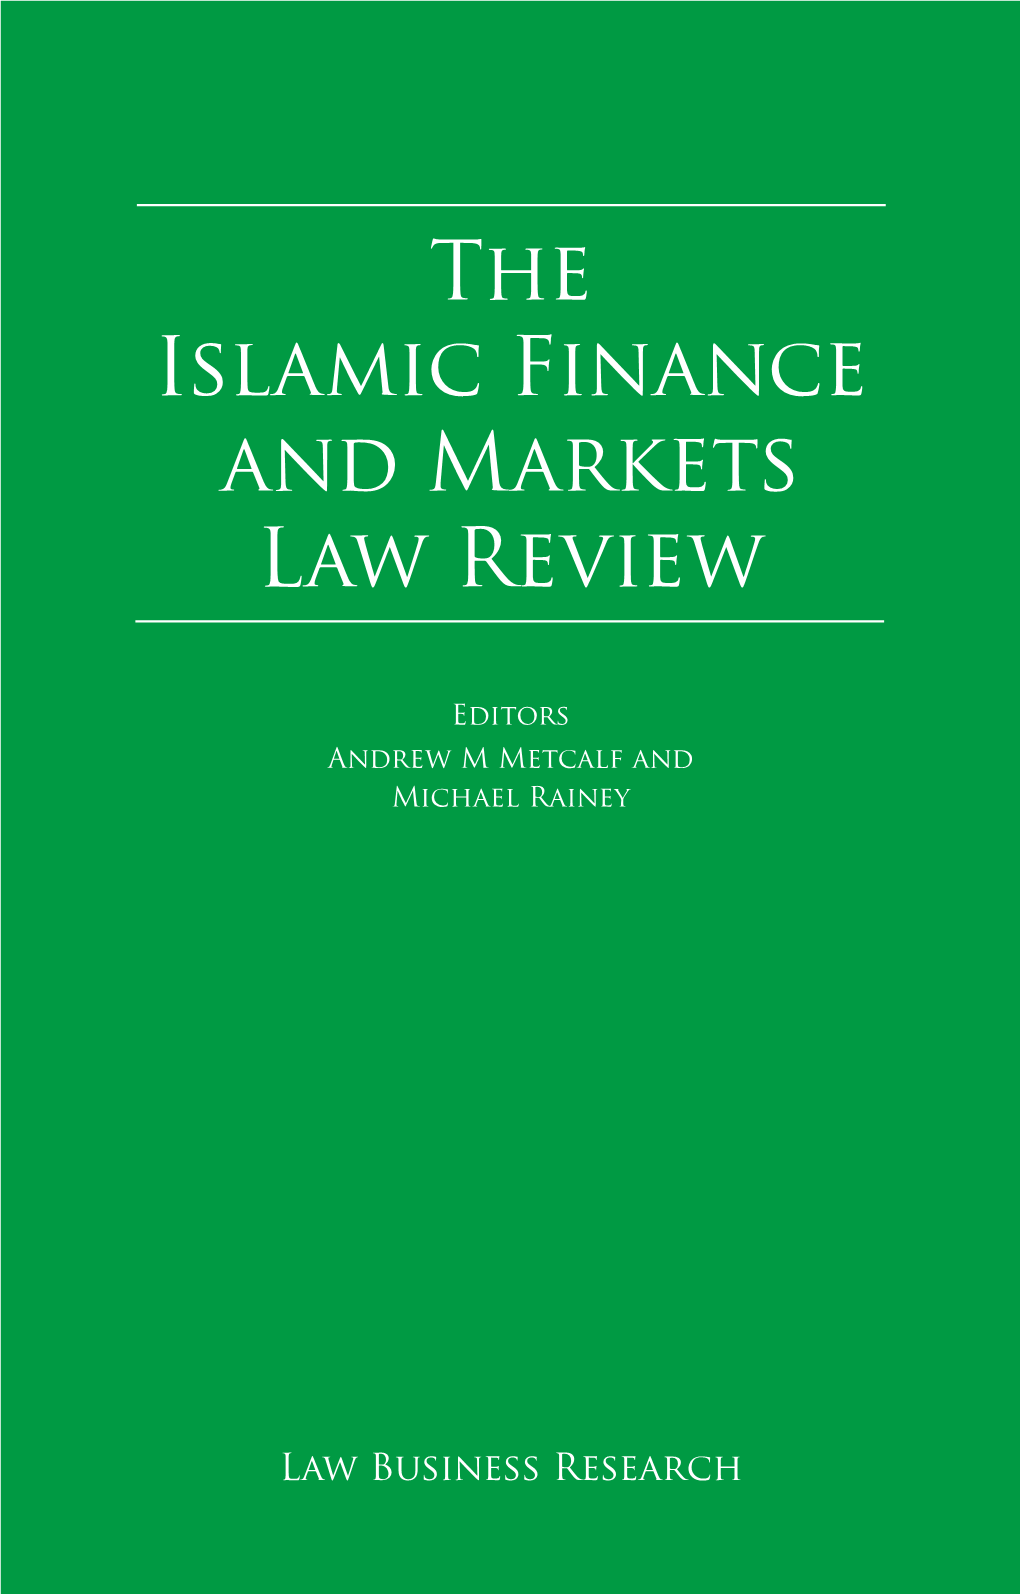 The Islamic Finance and Markets Law Review